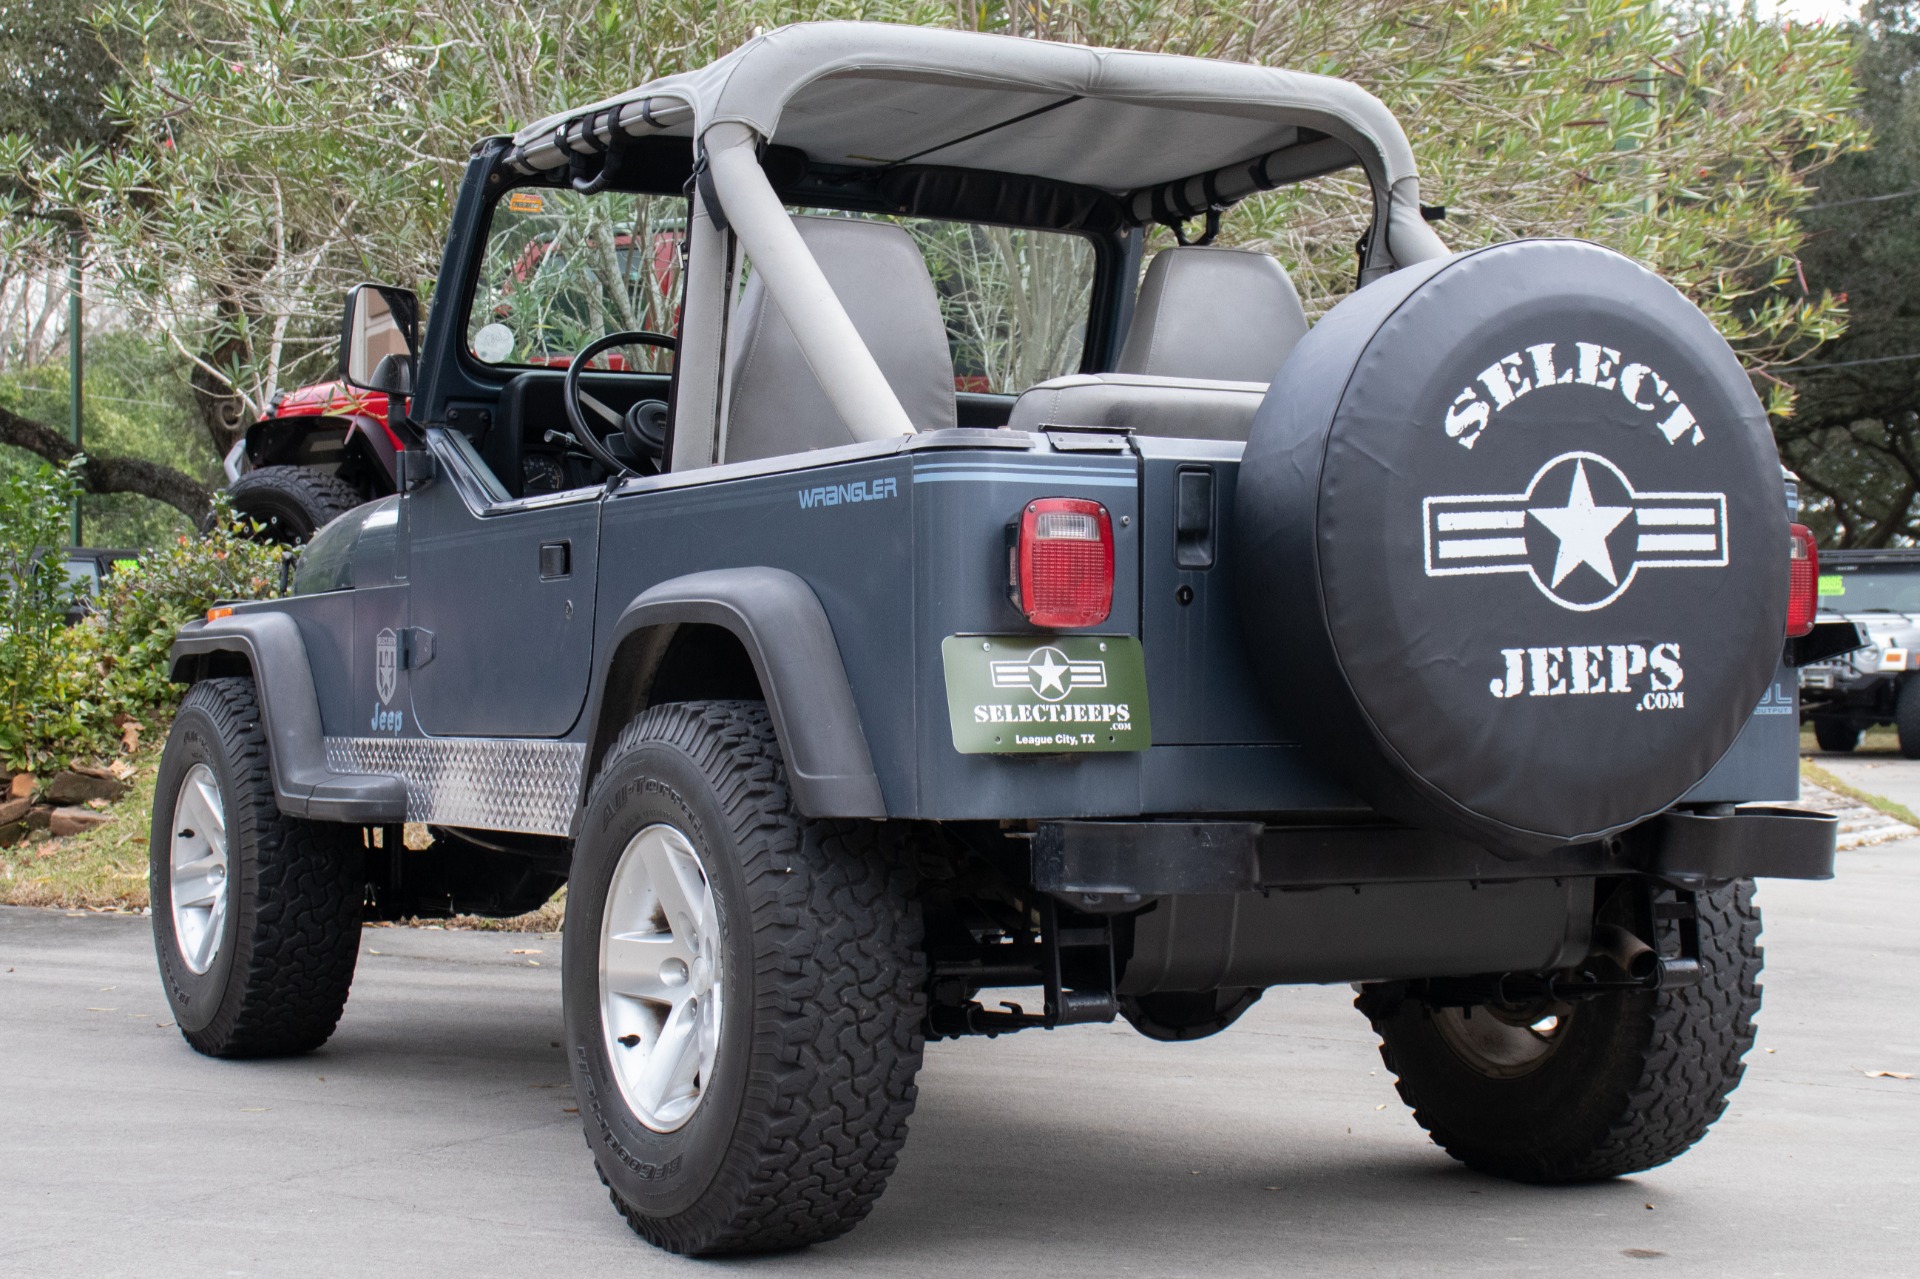 Used 1991 Jeep Wrangler For Sale ($8,995) | Select Jeeps Inc. Stock #146687